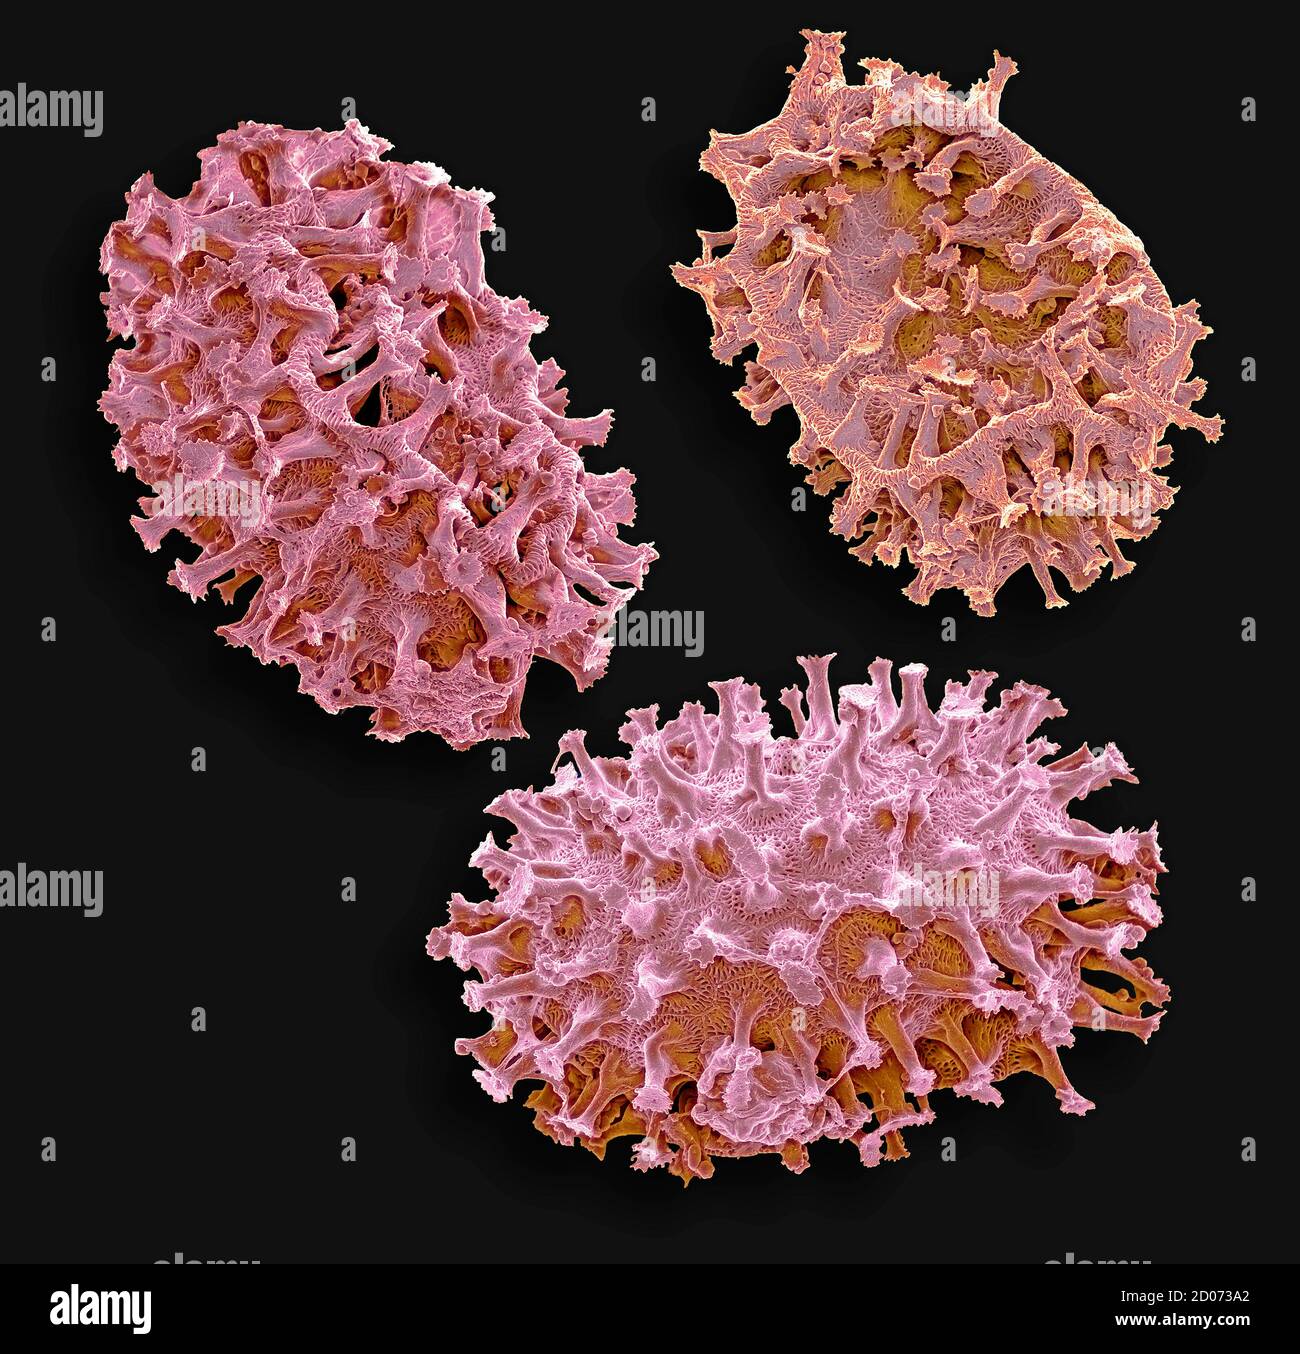 Gastrotrich eggs. Coloured scanning electron micrograph (SEM) of a Chaetonotus sp. gastrotrich eggs. Gastrotrichs are microscopic, worm-like animals f Stock Photo